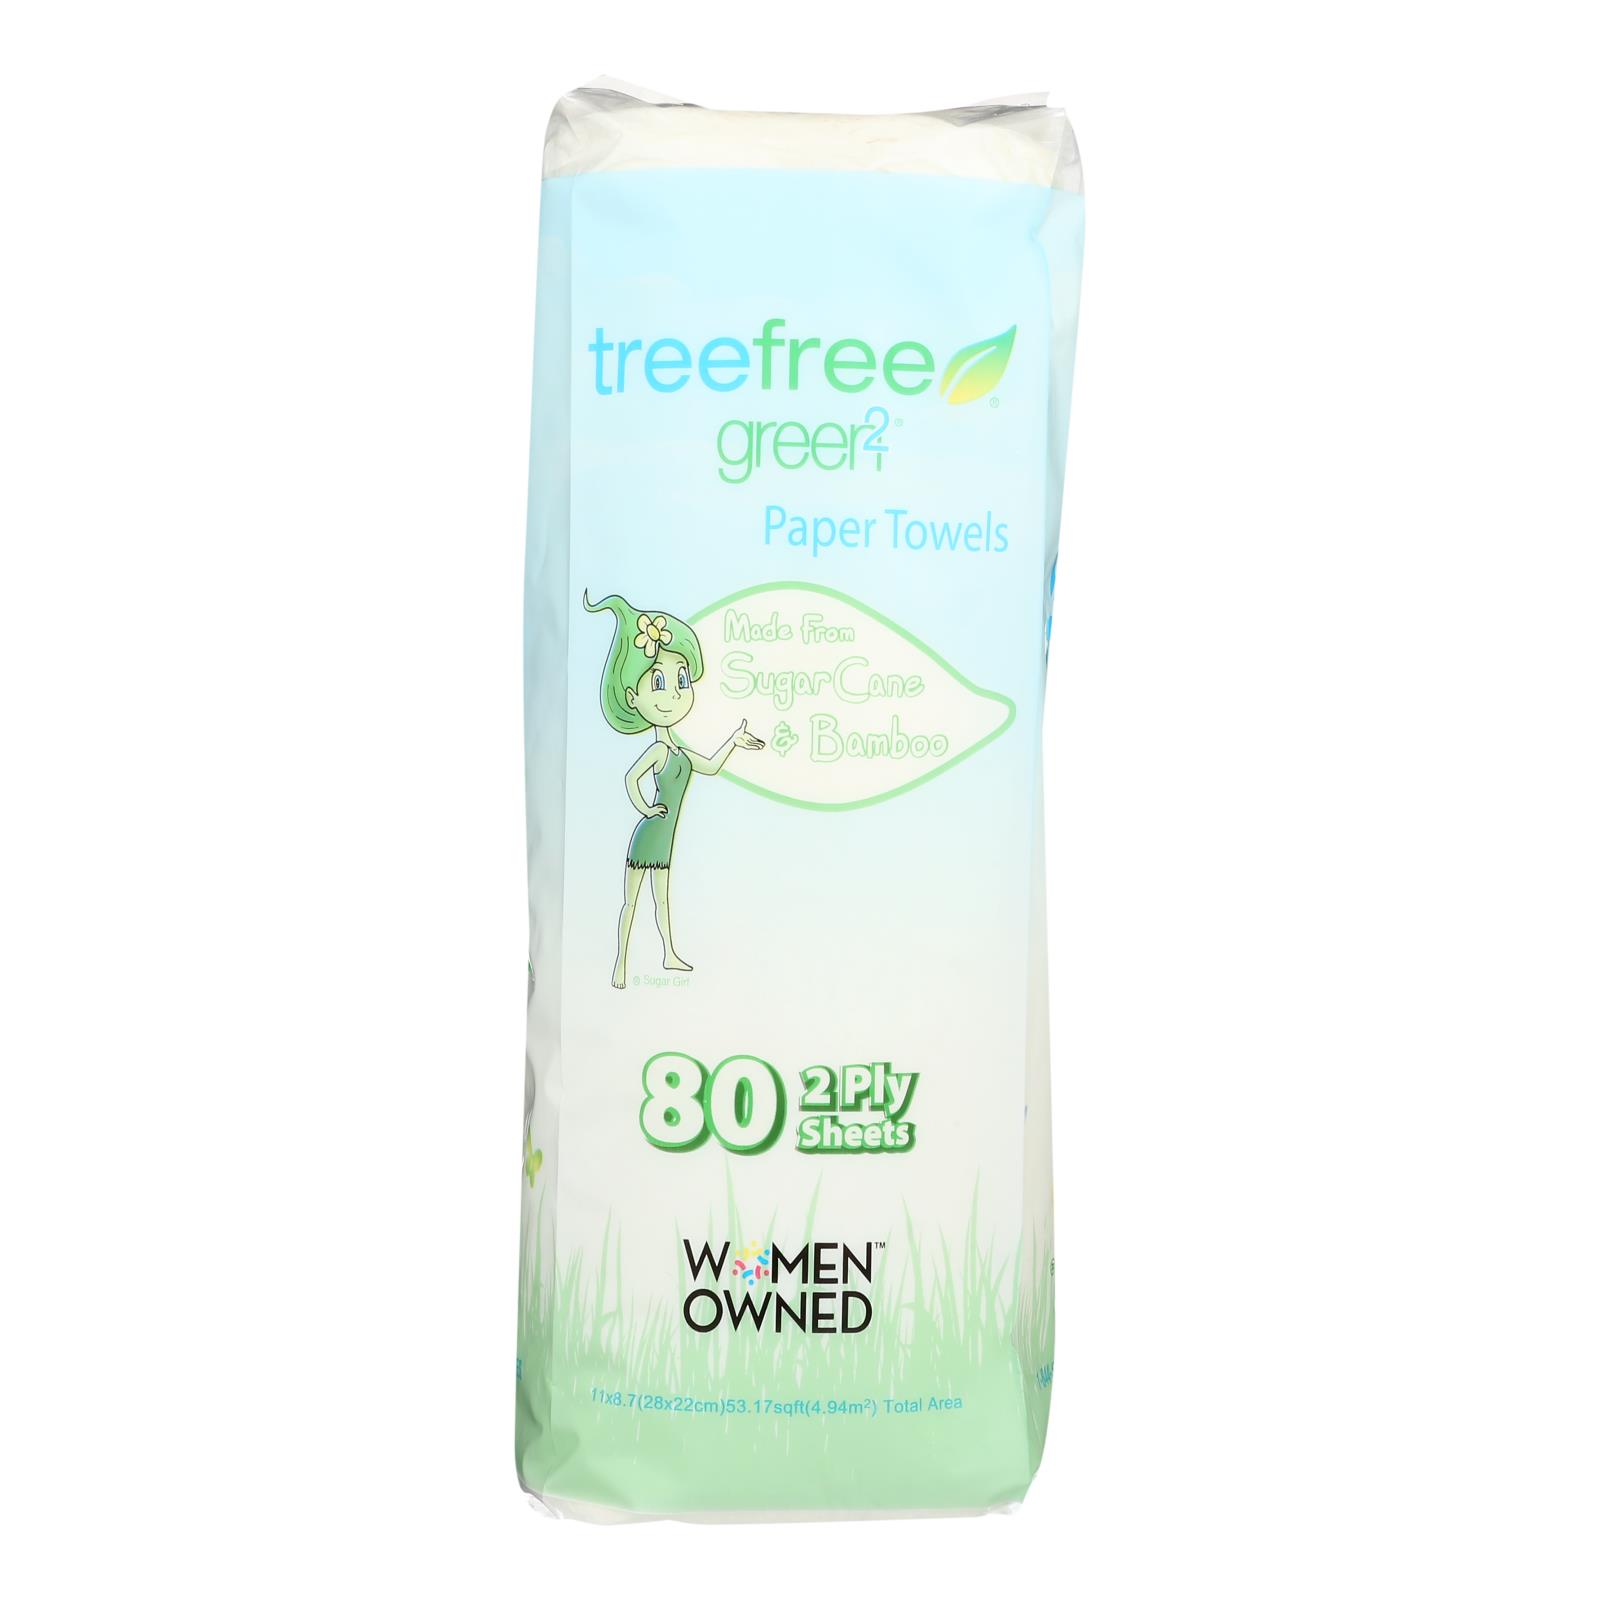 Green 2 - Paper Towels 80 Sht 2 Ply - 15개 묶음상품 - 1 ROLL